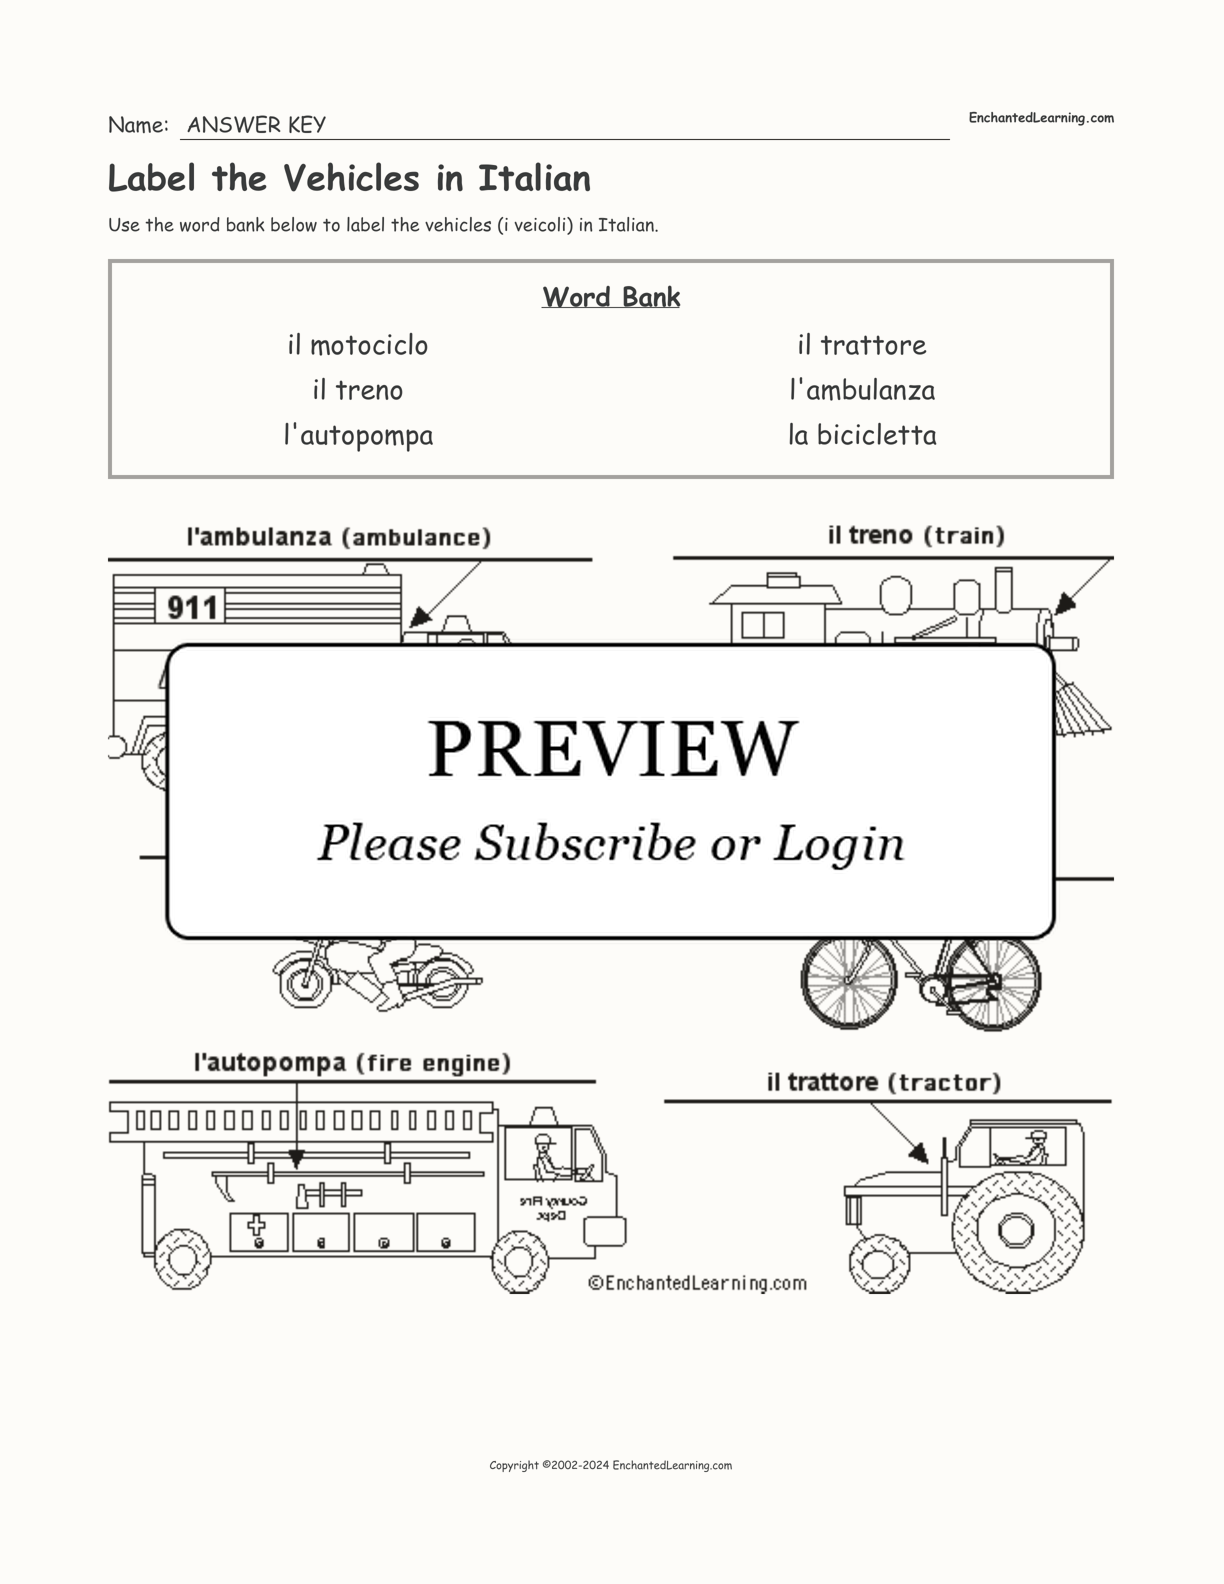 Label the Vehicles in Italian interactive worksheet page 2